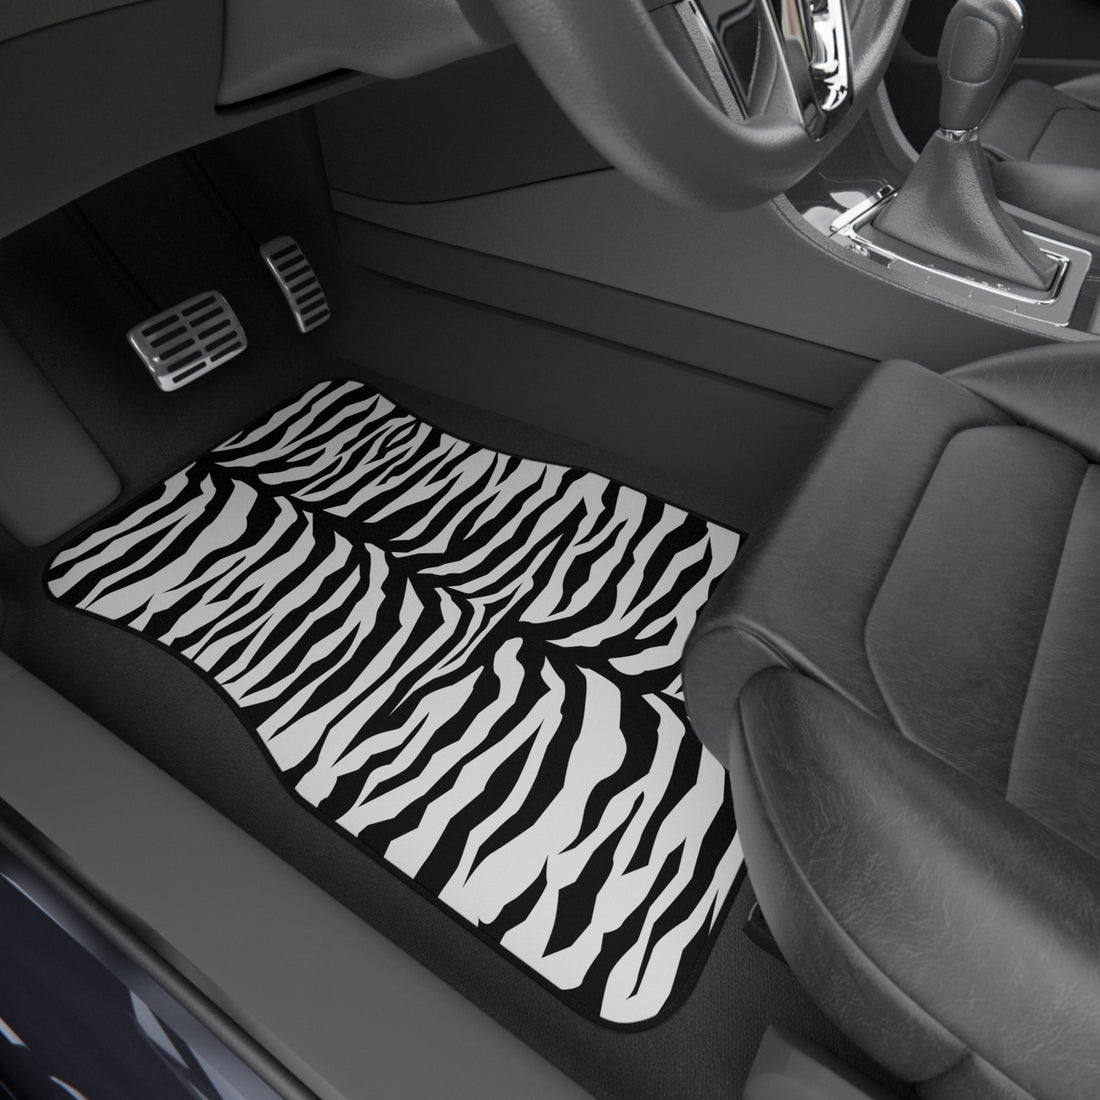 Car Mats (Set of 4) Tiger decoration Home-clothes-jewelry